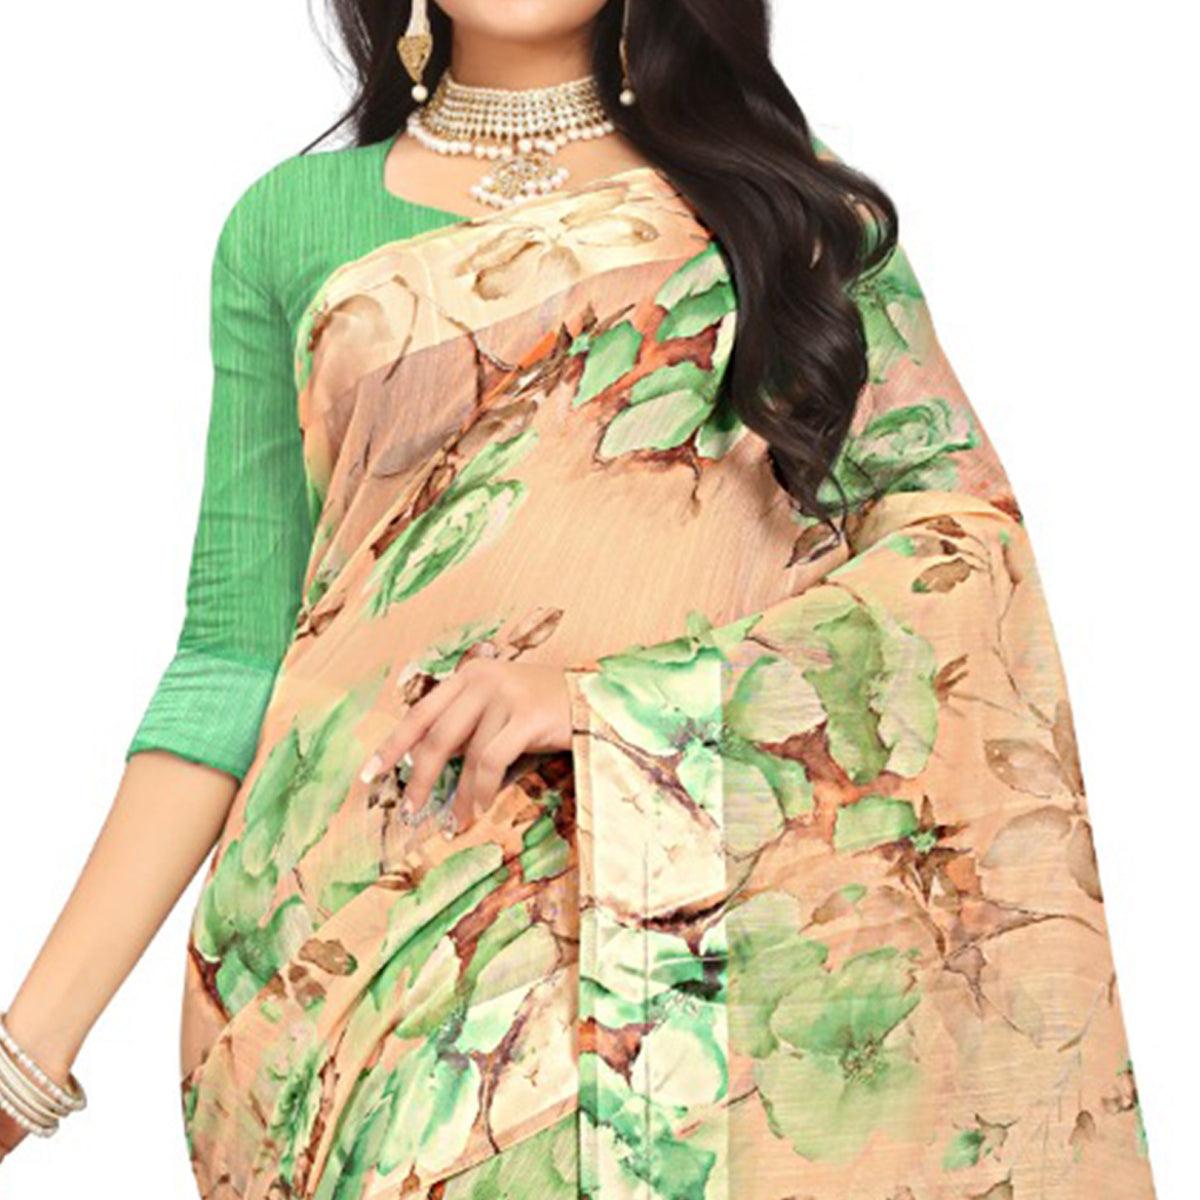 Engrossing Peach-Green Colored Casual Wear Floral Printed Linen Saree - Peachmode